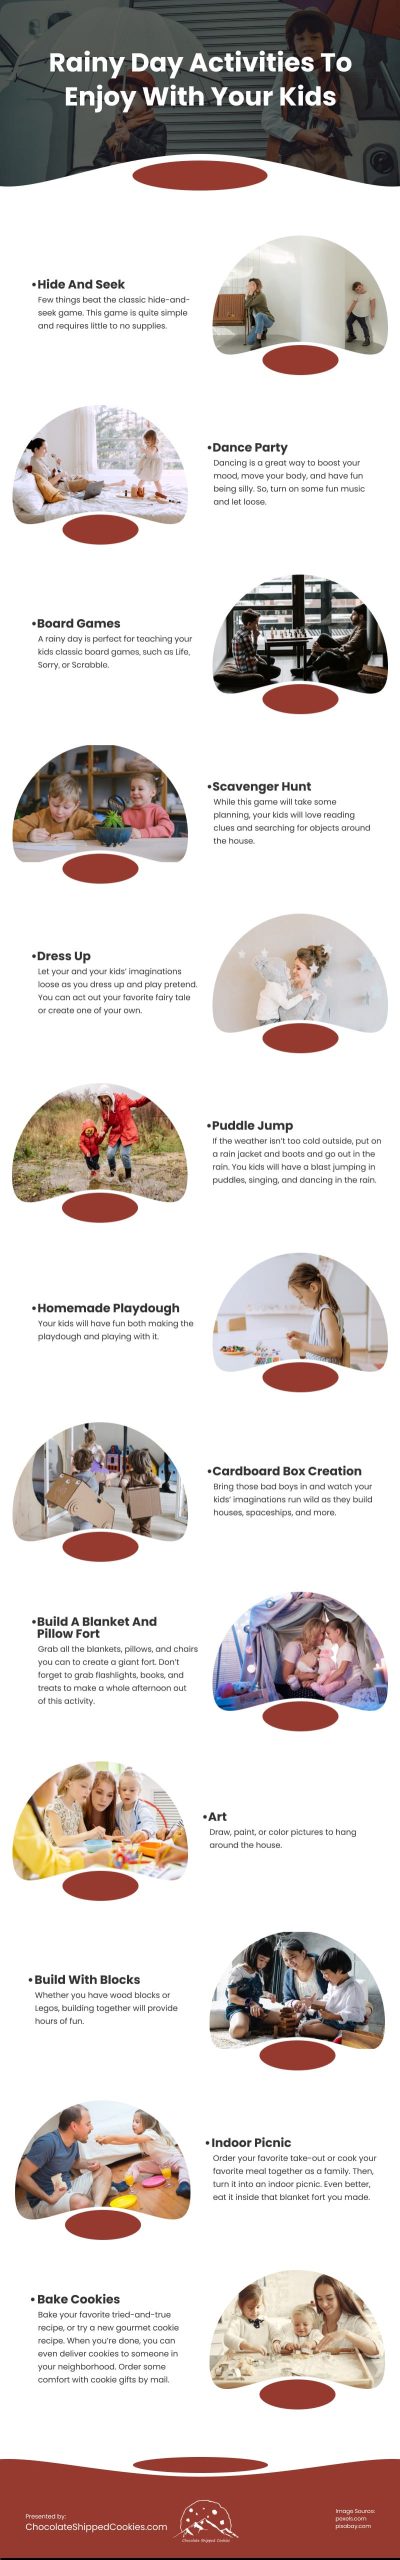 Rainy Day Activities To Enjoy With Your Kids Infographic